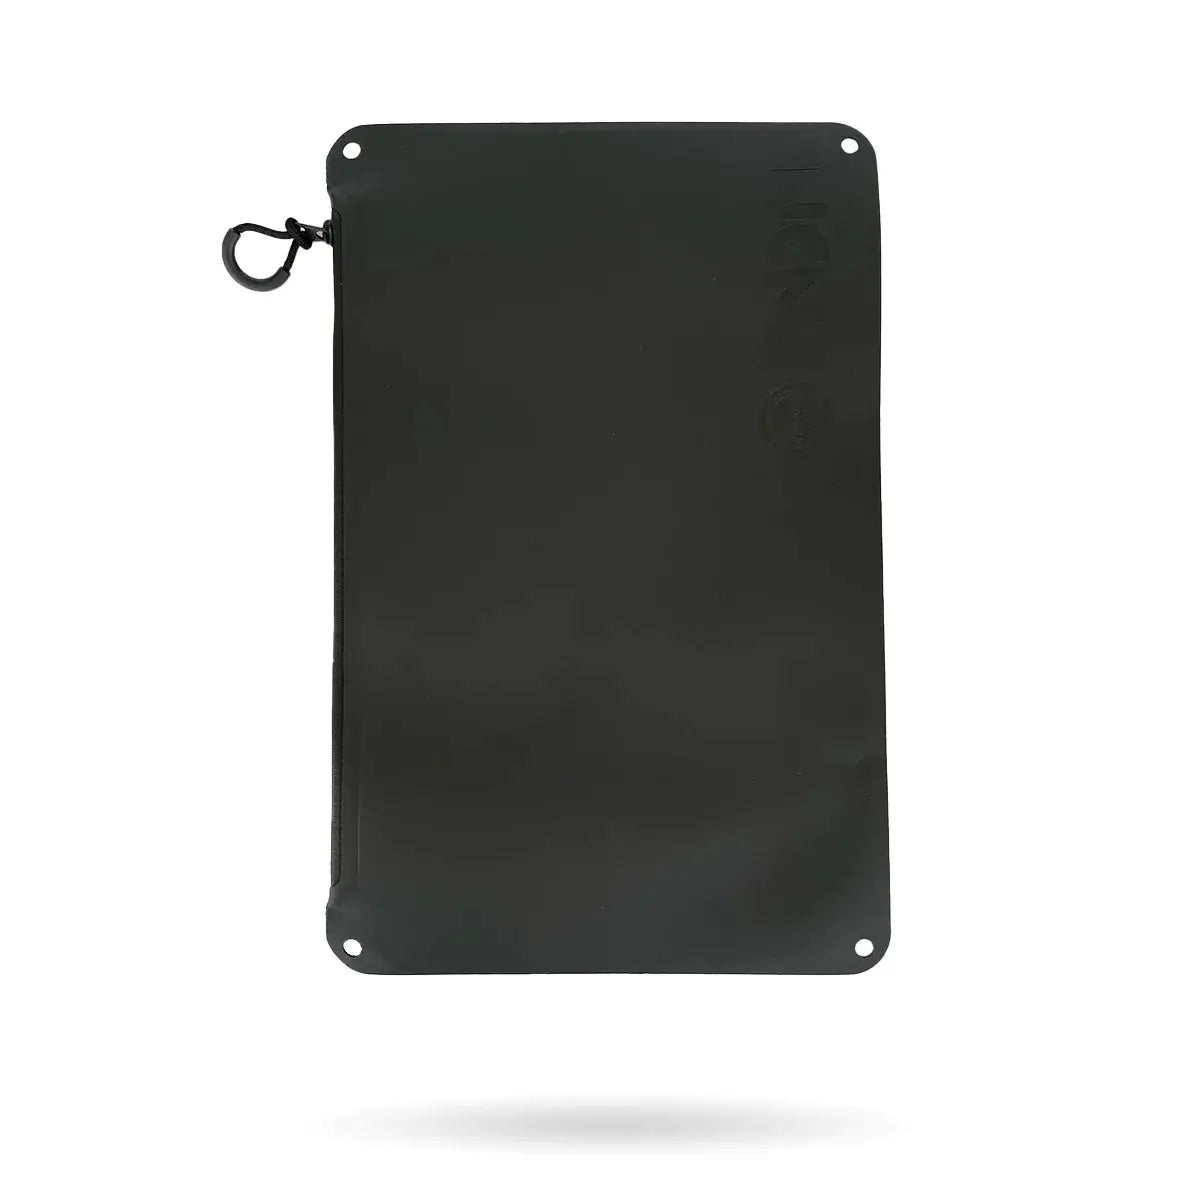 FOUNDATION WINDOW POUCH - LARGE